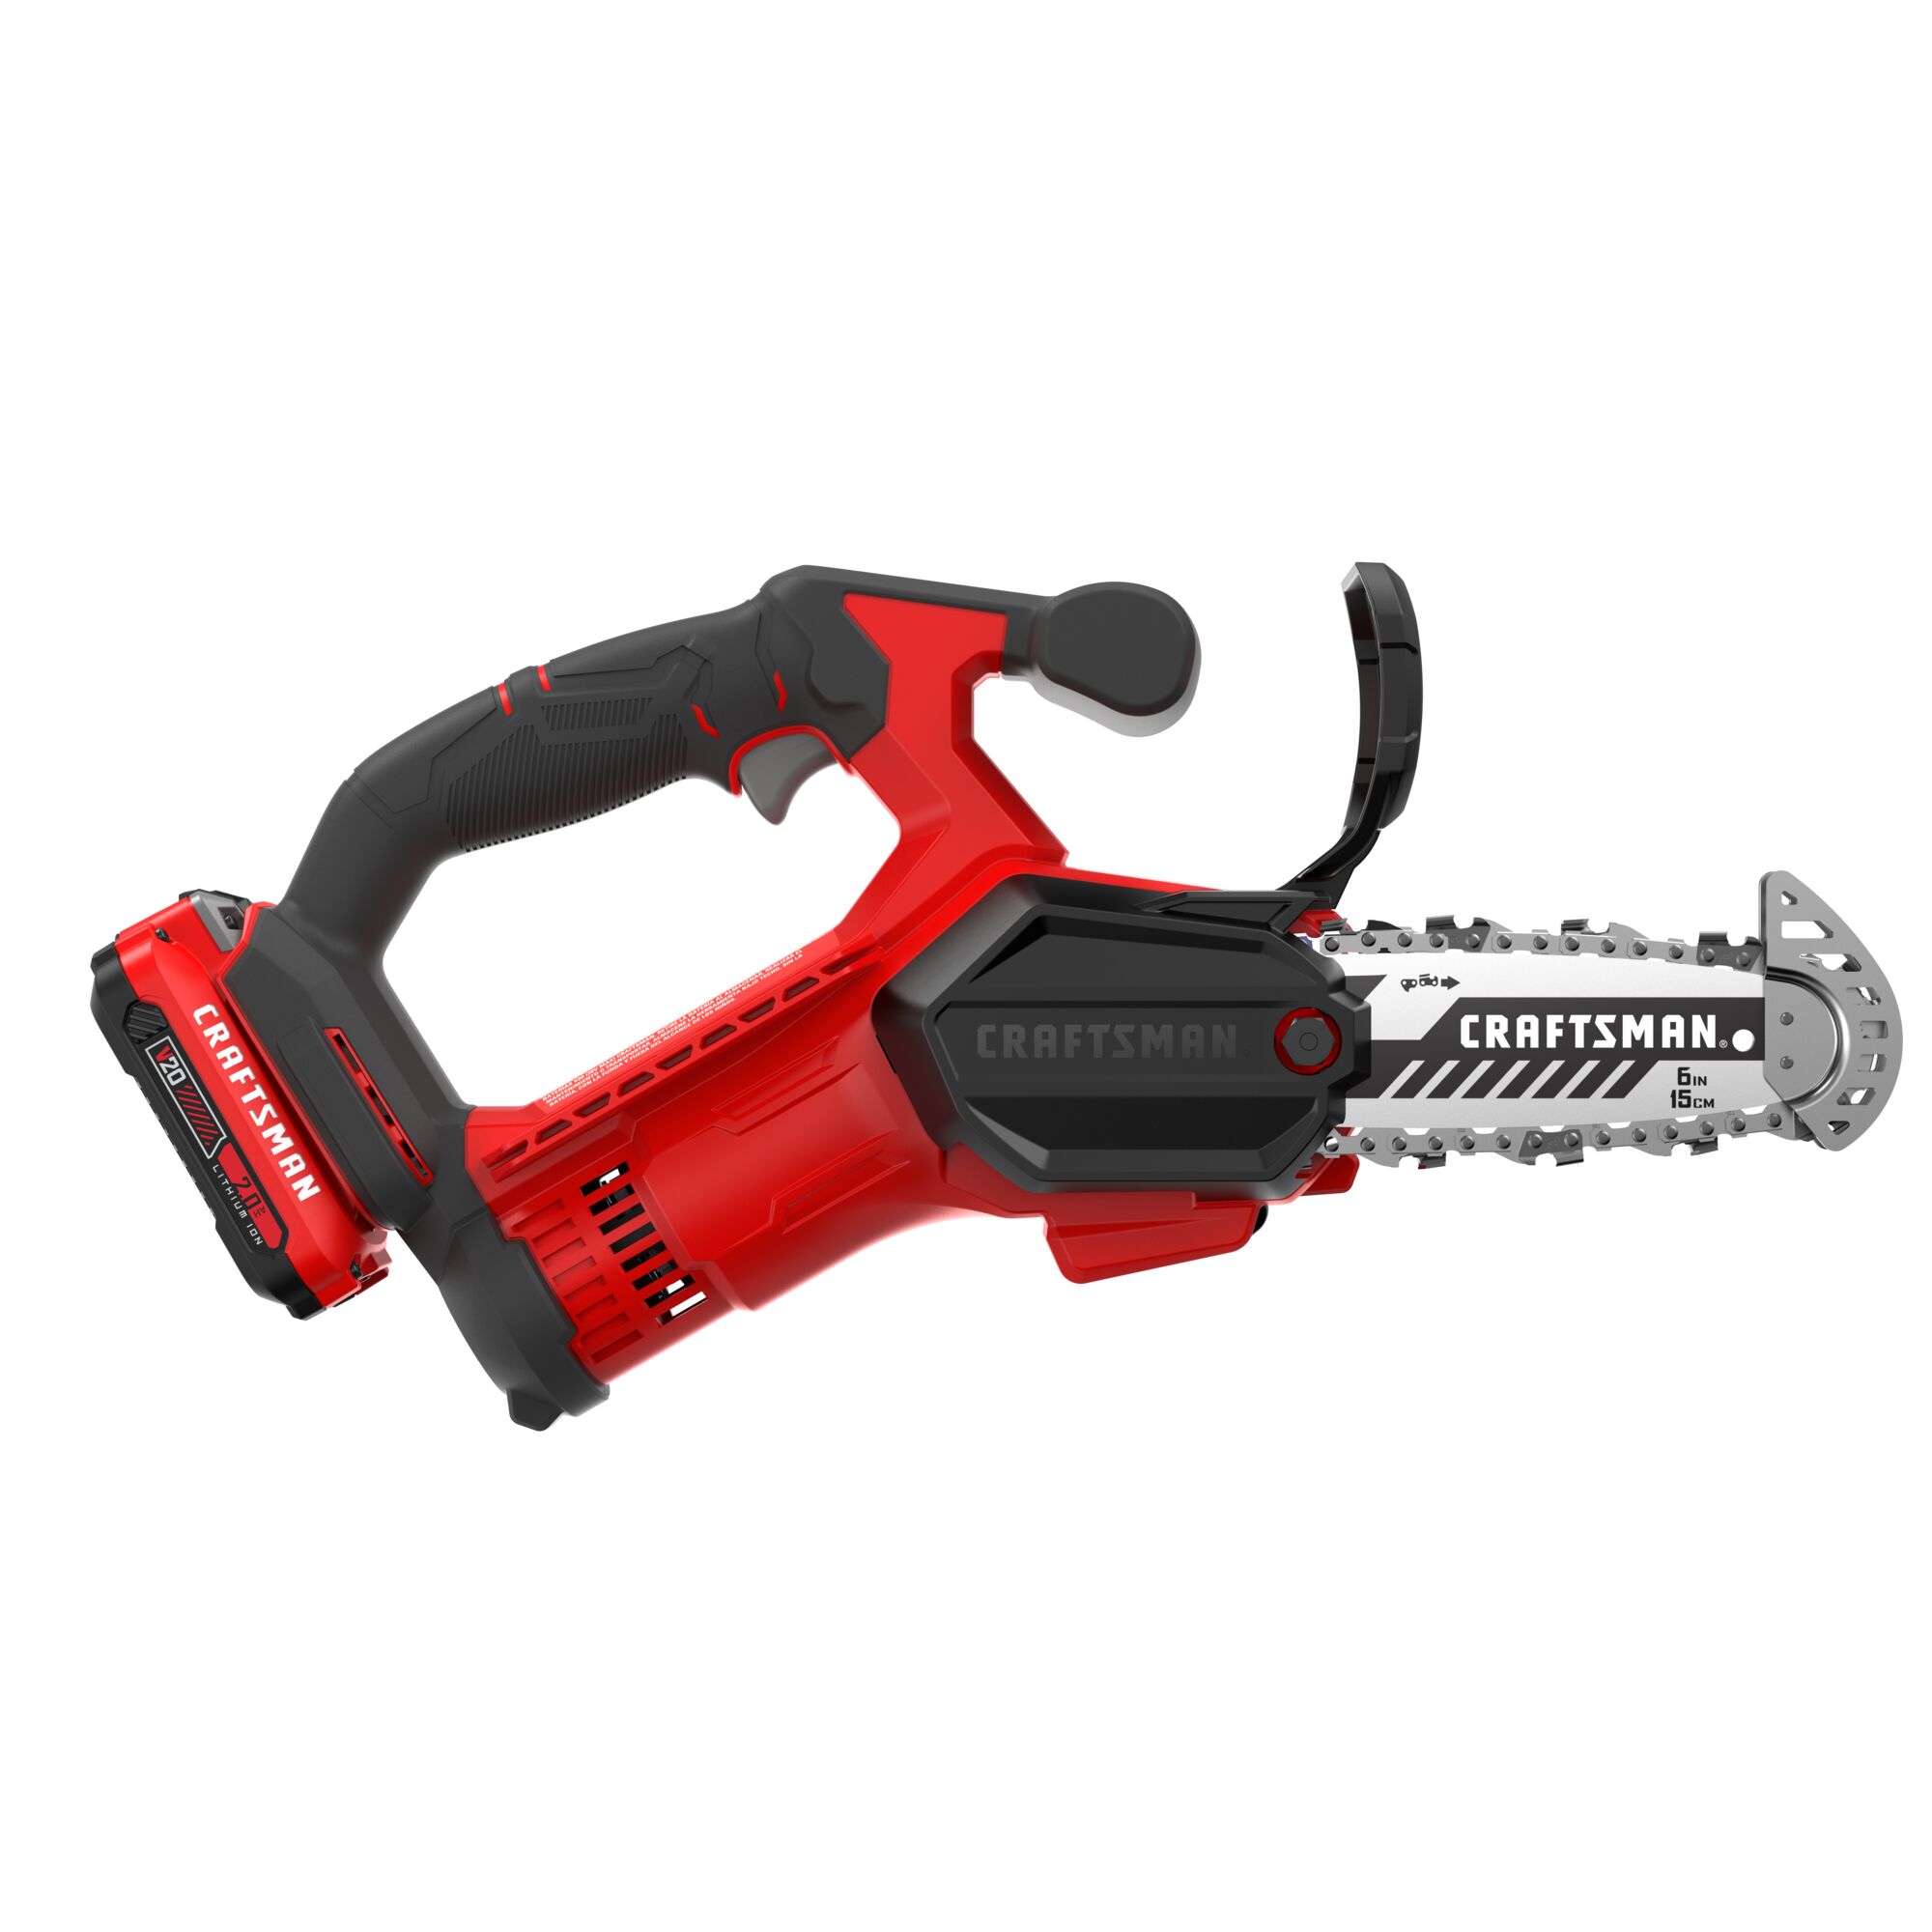 V20 Cordless Pruning Chainsaw on white background